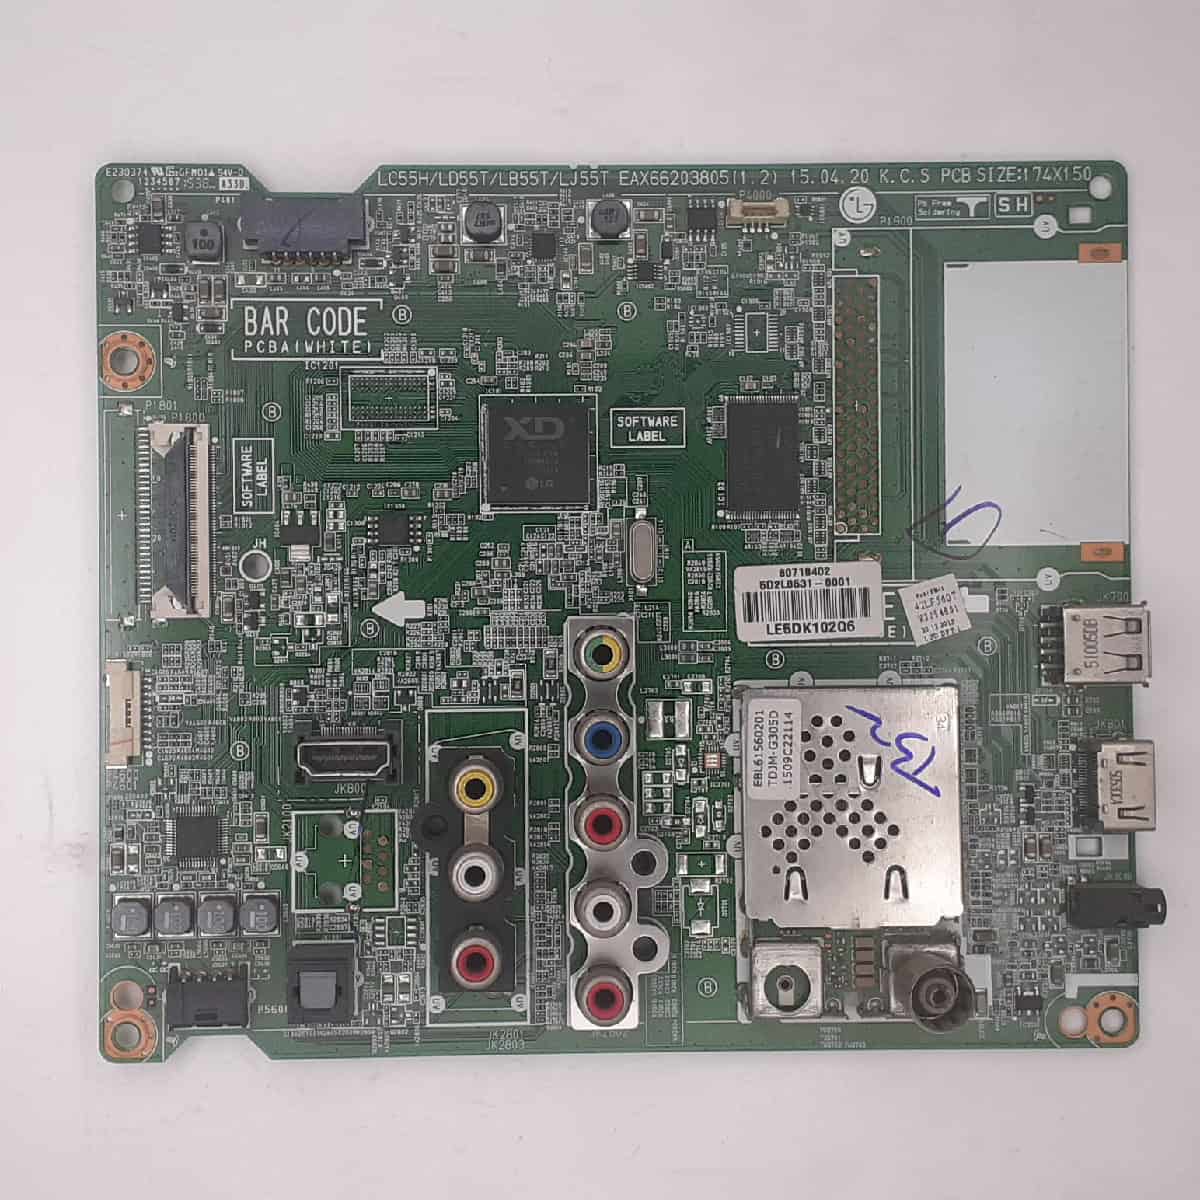 42LF560T LG MOTHERBOARD FOR LED TV